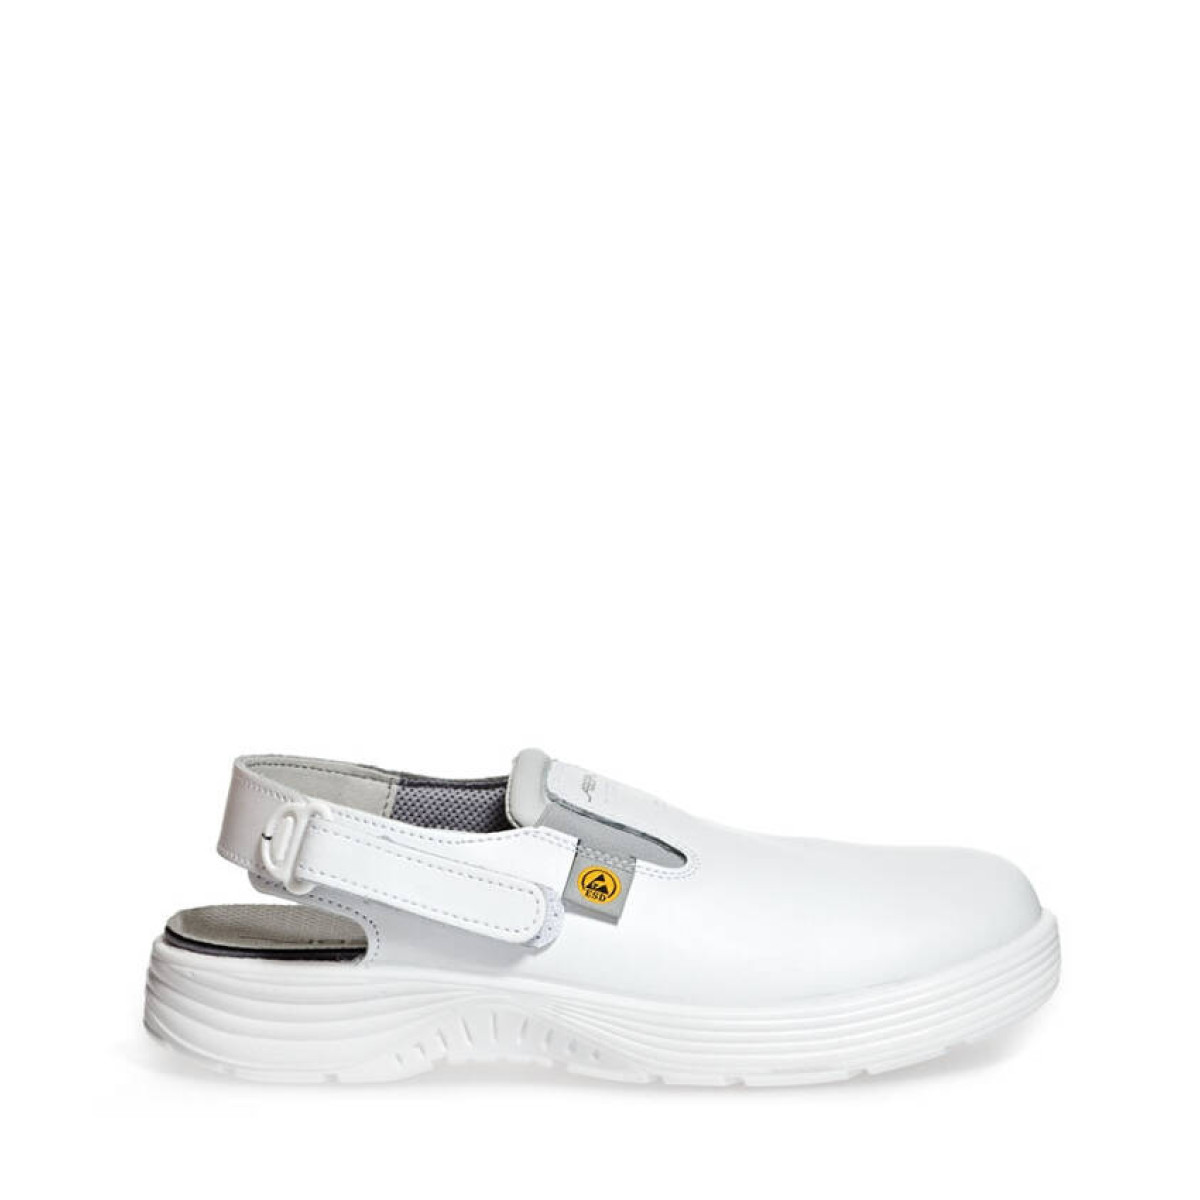 Color:white with steel cap, Size:48